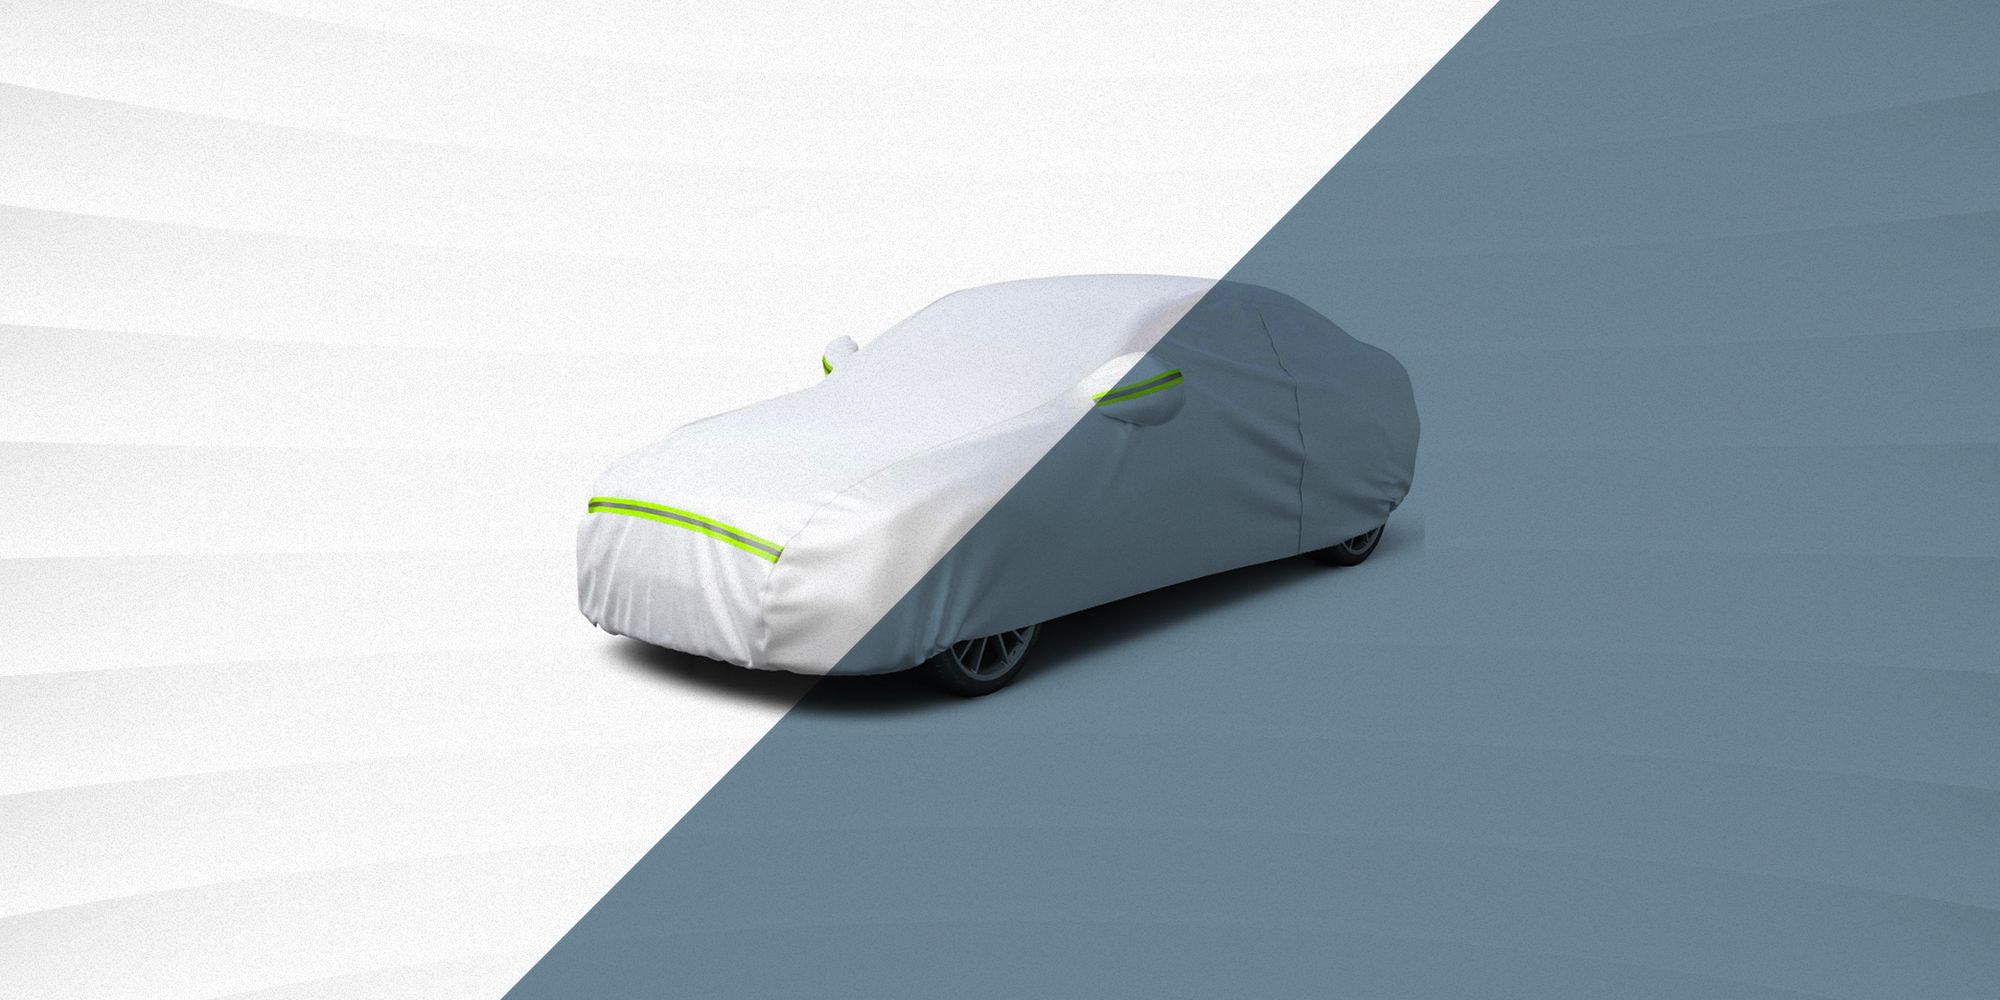 Universal Style Car Snow Cover Front Windshield Anti-Frost Anti-Freeze Snow  Cover Winter Magnetic Suction Car Window Car Cover Snow